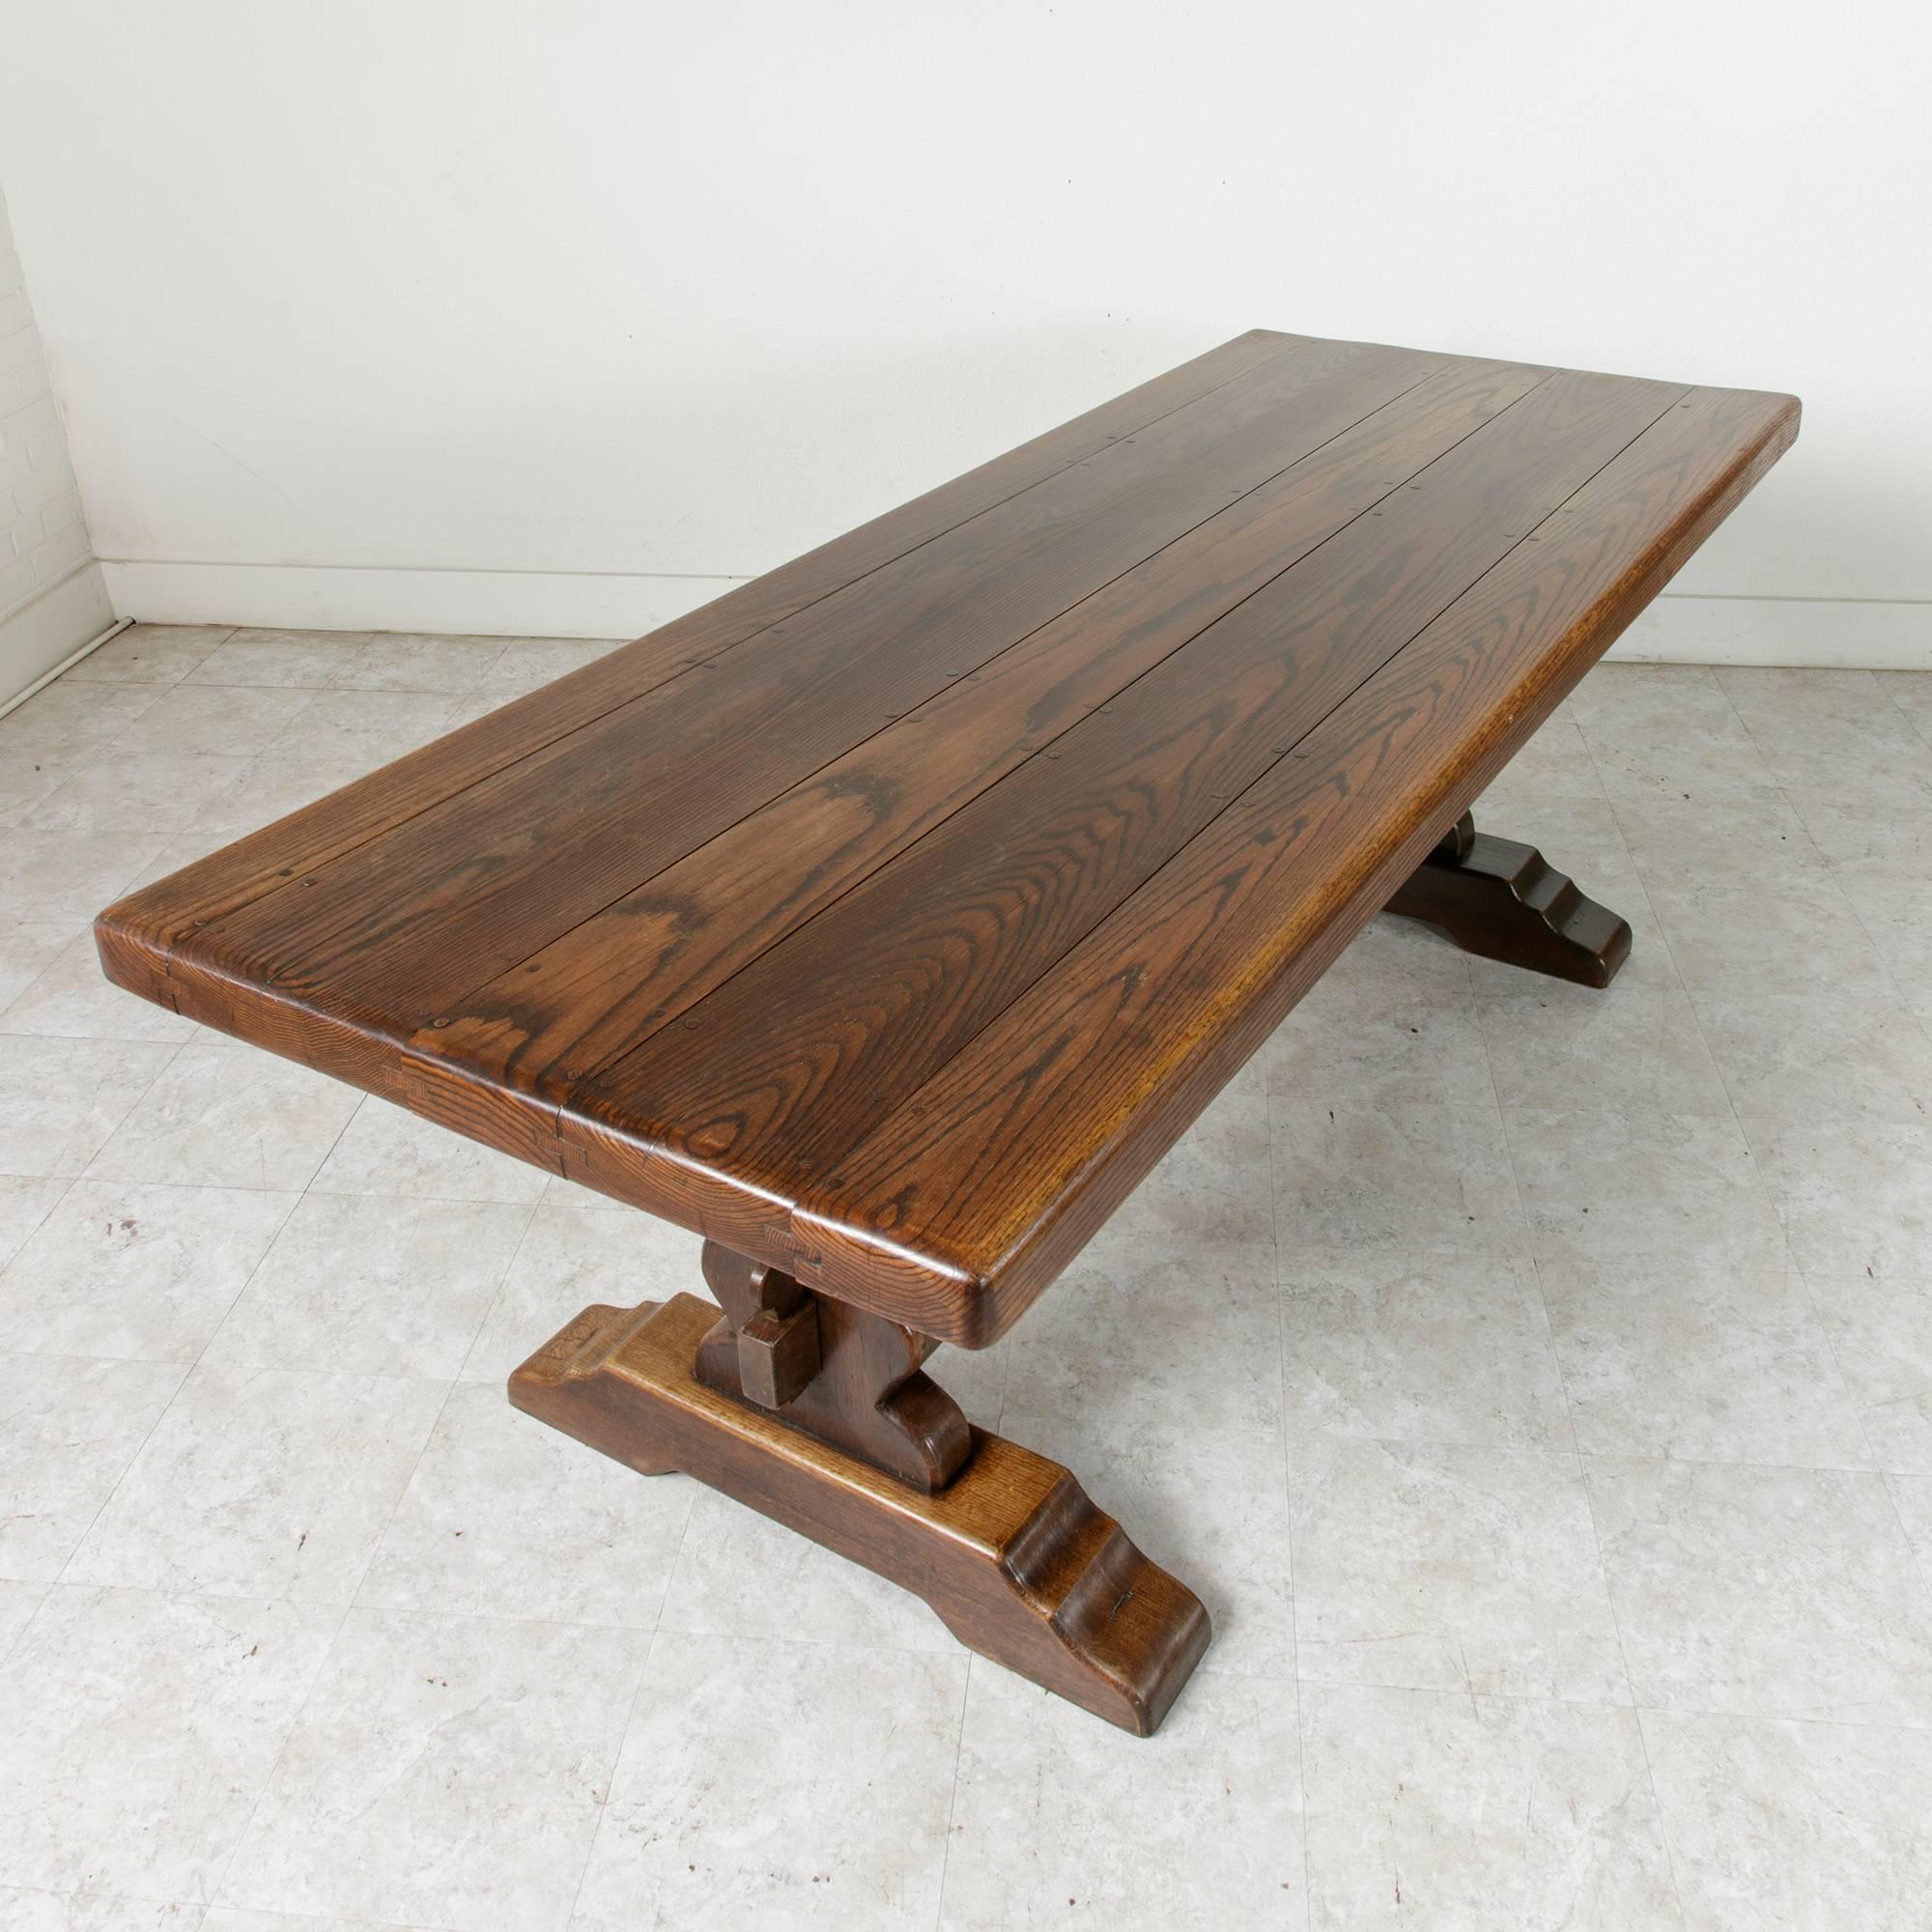 This Normandy monastery table was created by artisans in the first half of the 20th century for use as the principal dining table on a farm. Made of solid oak, the sturdy handmade trestle construction of this piece will last for centuries. The 2 1/2